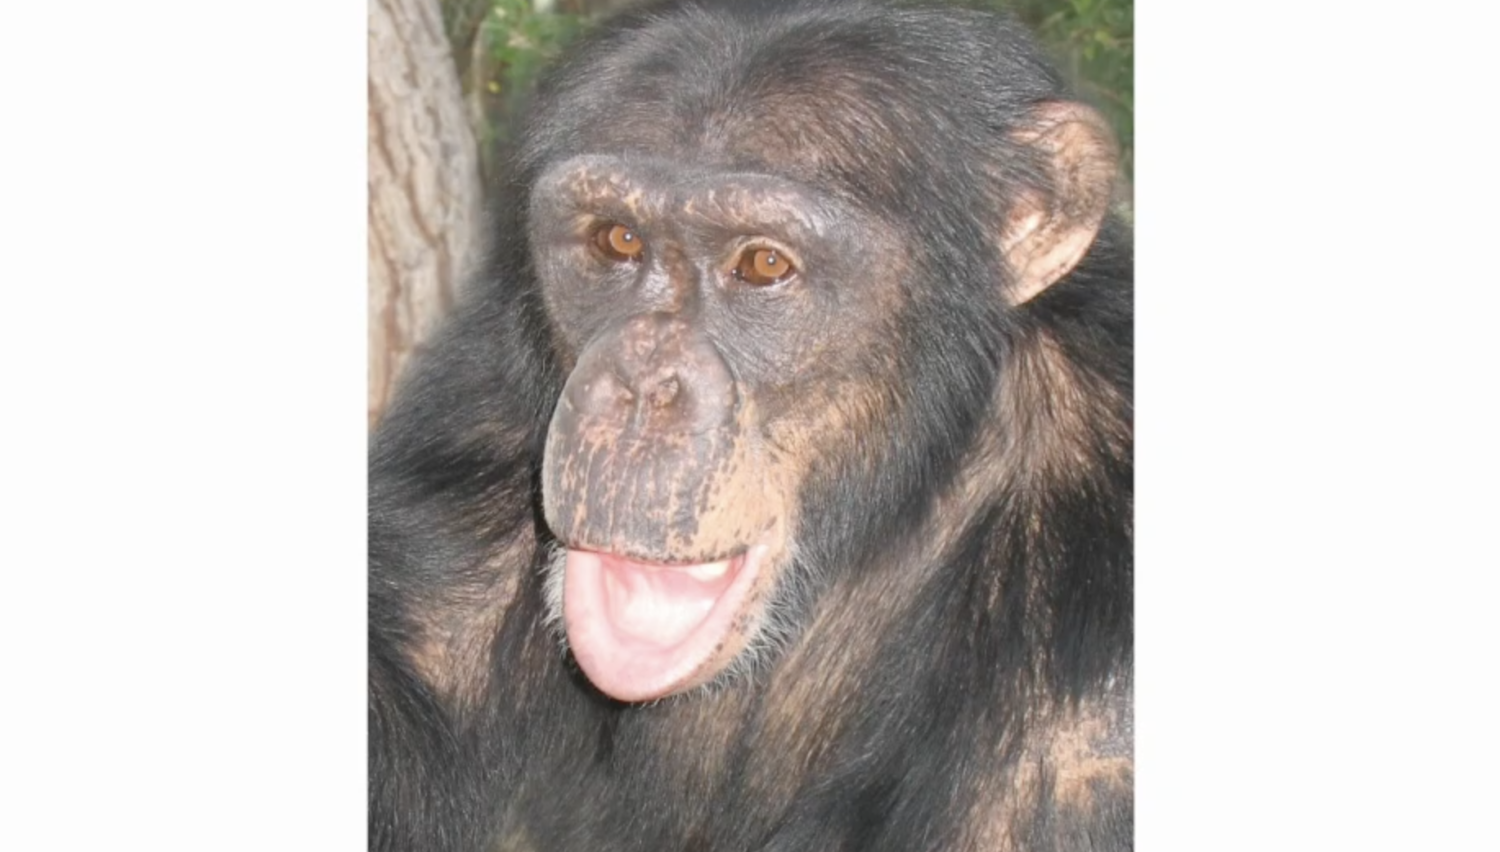 Chimps need your help